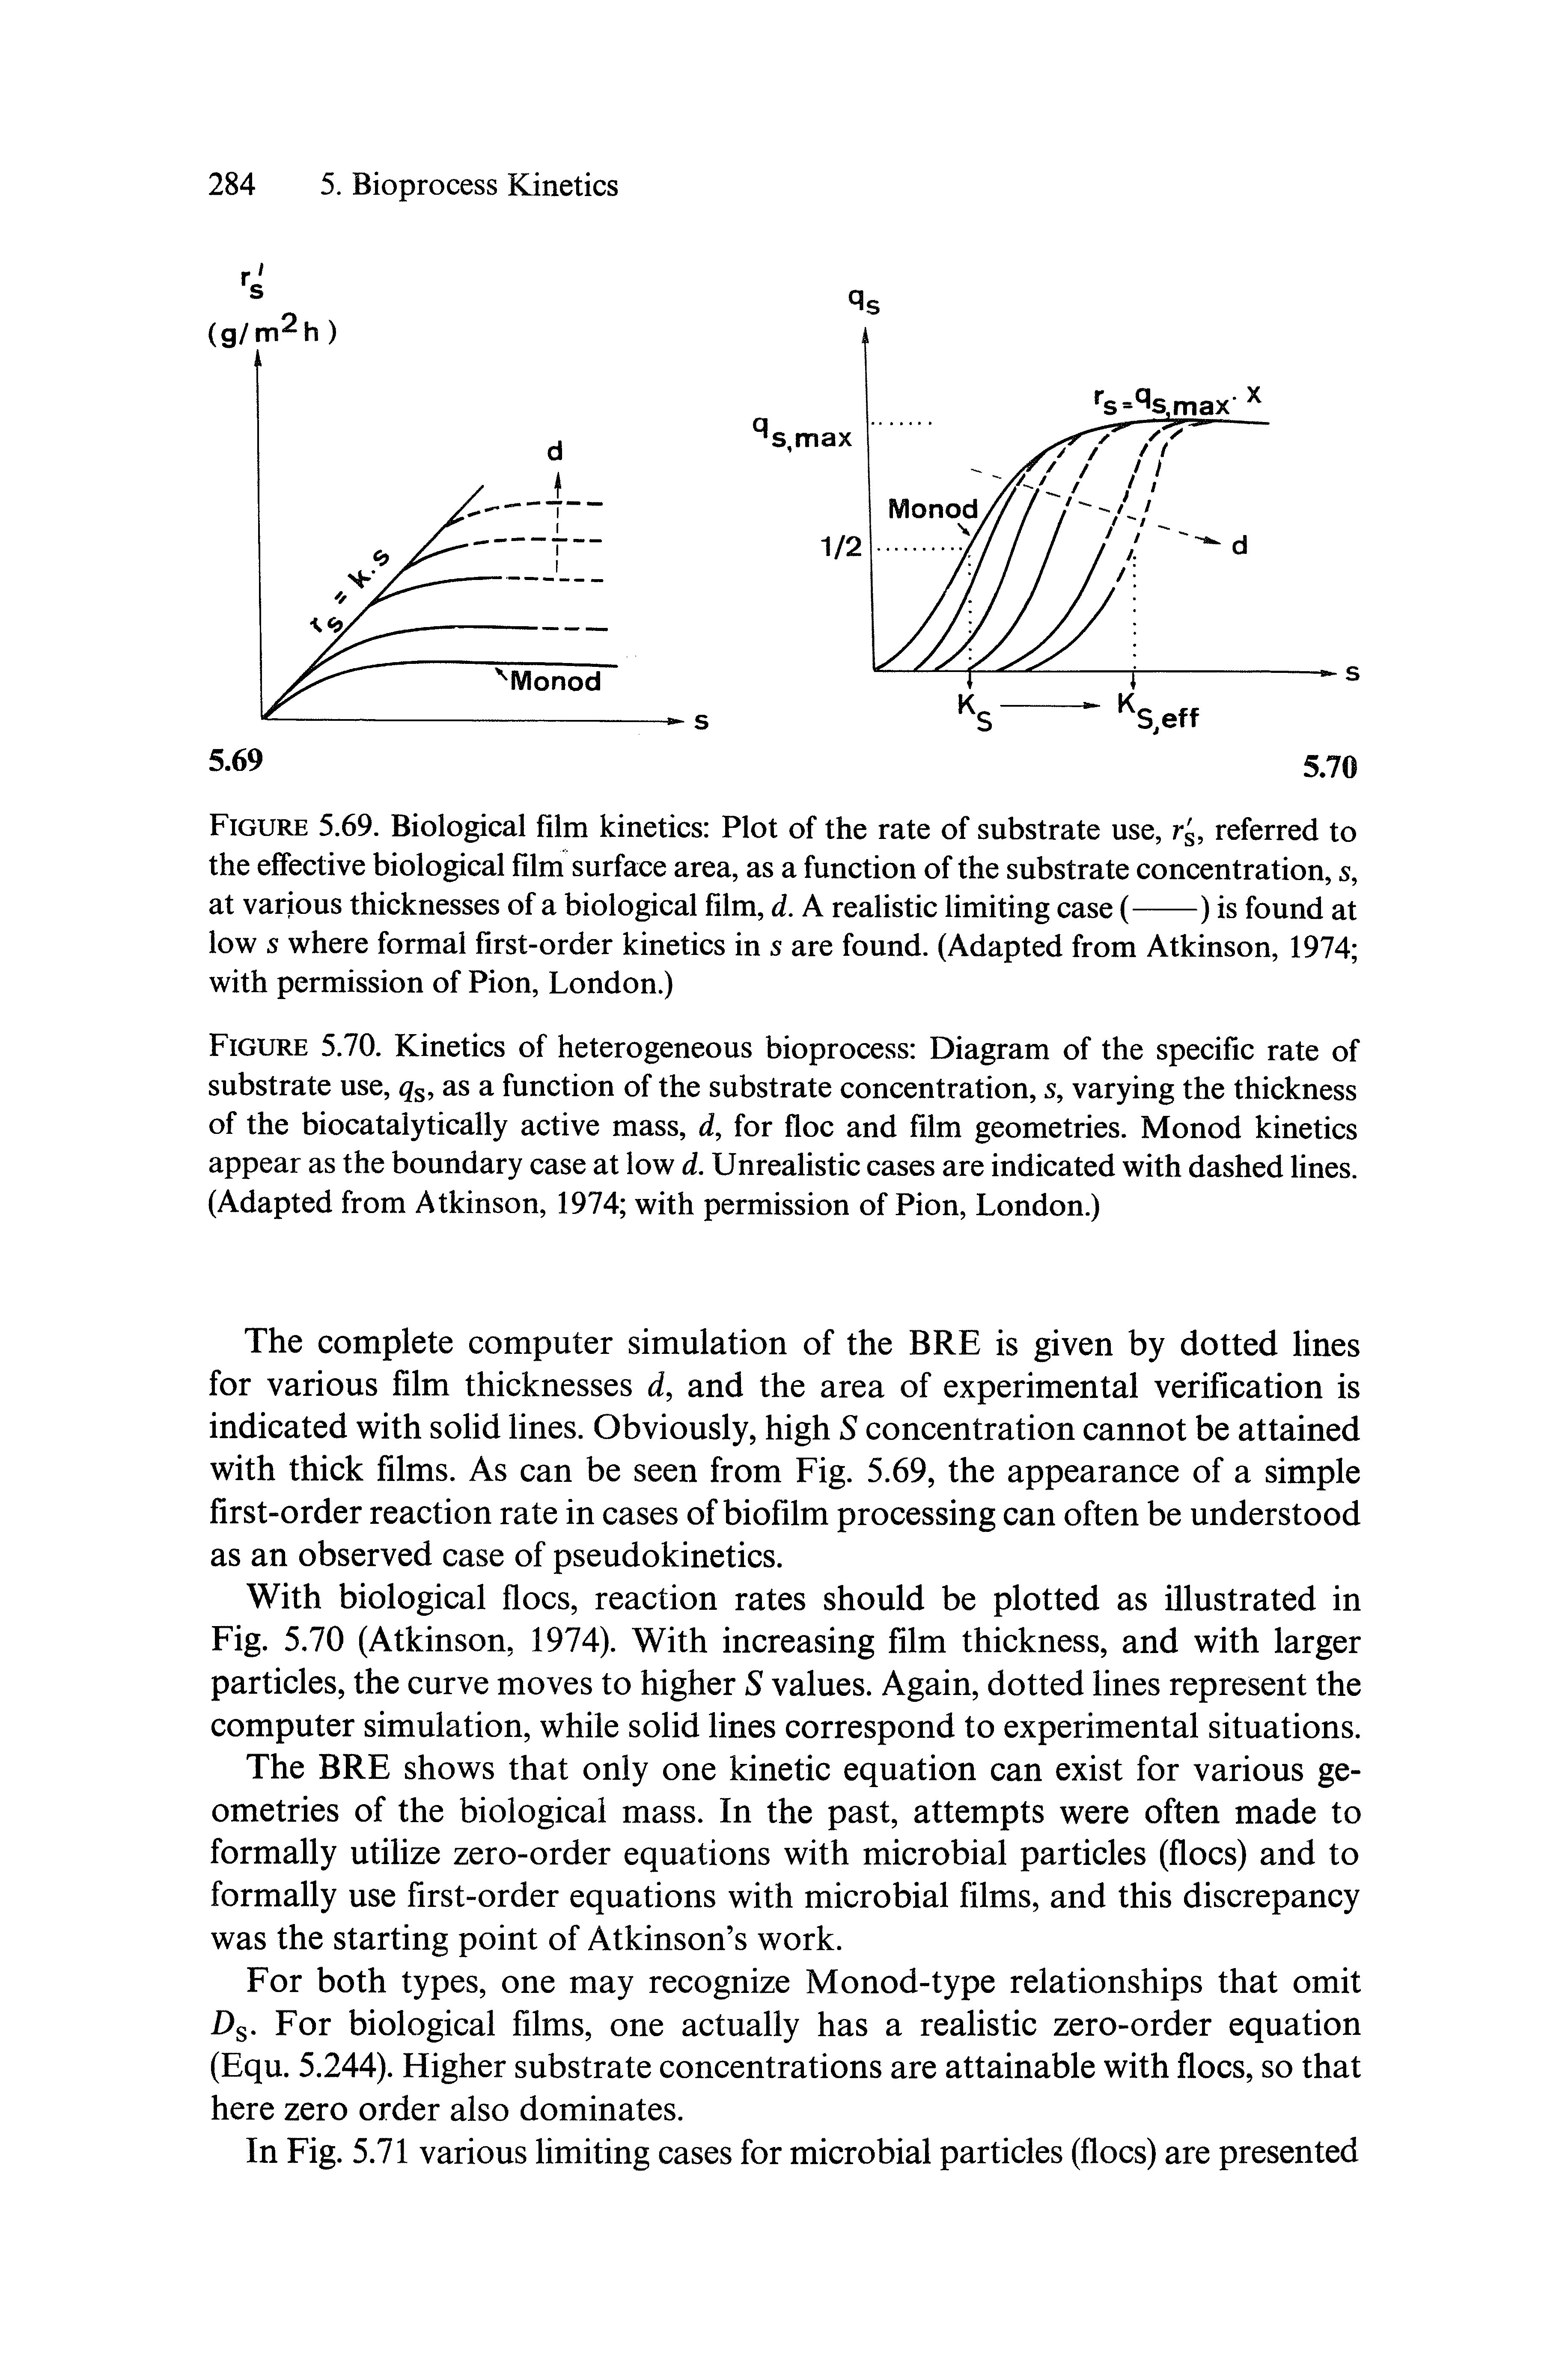 Figure 5.70. Kinetics of heterogeneous bioprocess Diagram of the specific rate of substrate use, as a function of the substrate concentration, s, varying the thickness of the biocatalytically active mass, d, for floe and film geometries. Monod kinetics appear as the boundary case at low d. Unrealistic cases are indicated with dashed lines. (Adapted from Atkinson, 1974 with permission of Pion, London.)...